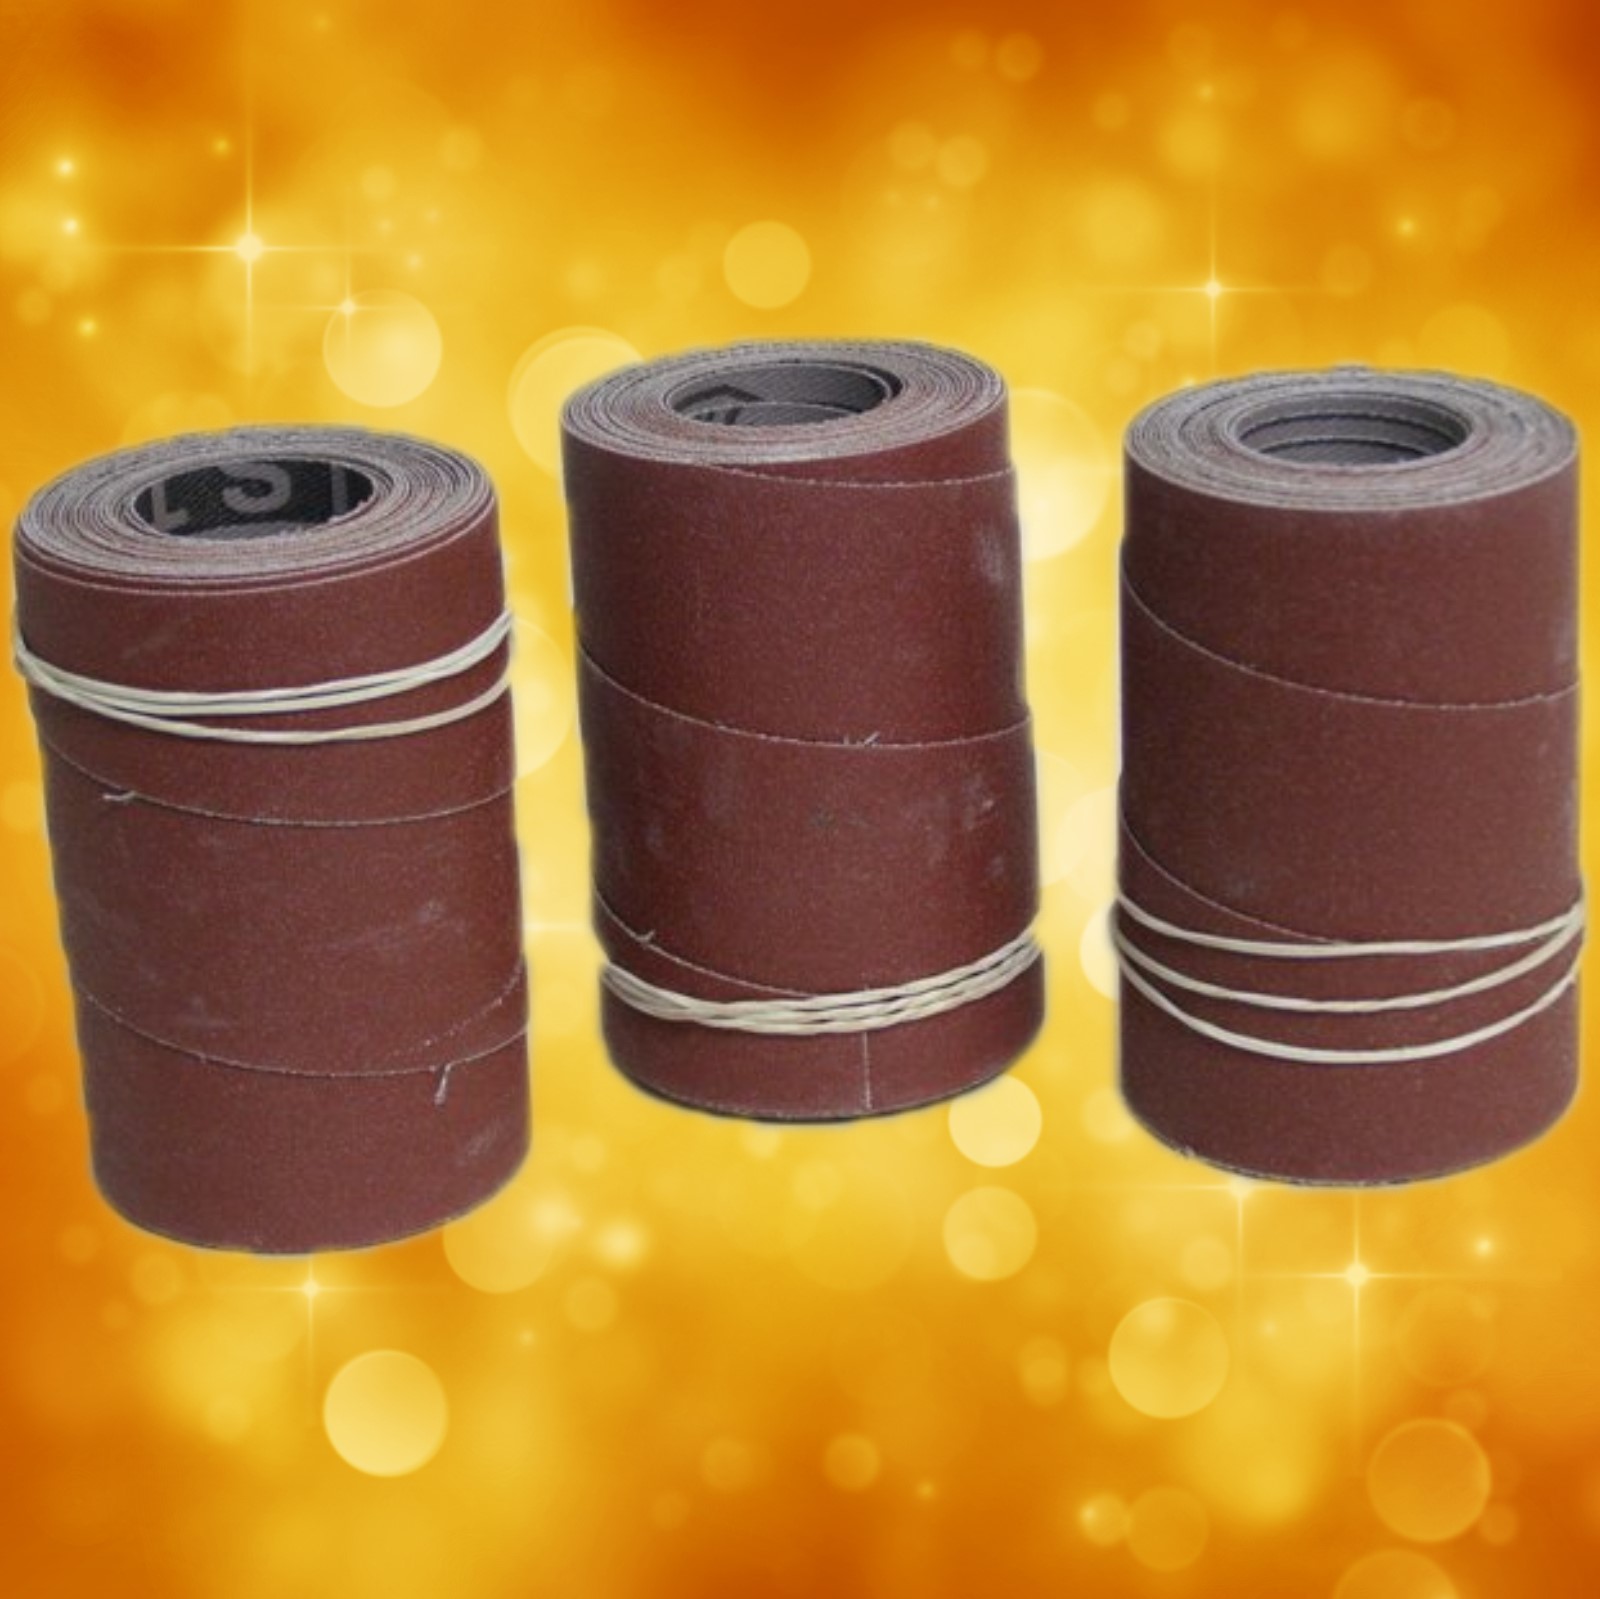 Jet Sand Paper 60-2180 Ready-To-Wrap Abrasives, 180 grit, 3-wraps in Box for 22-44
60-2180